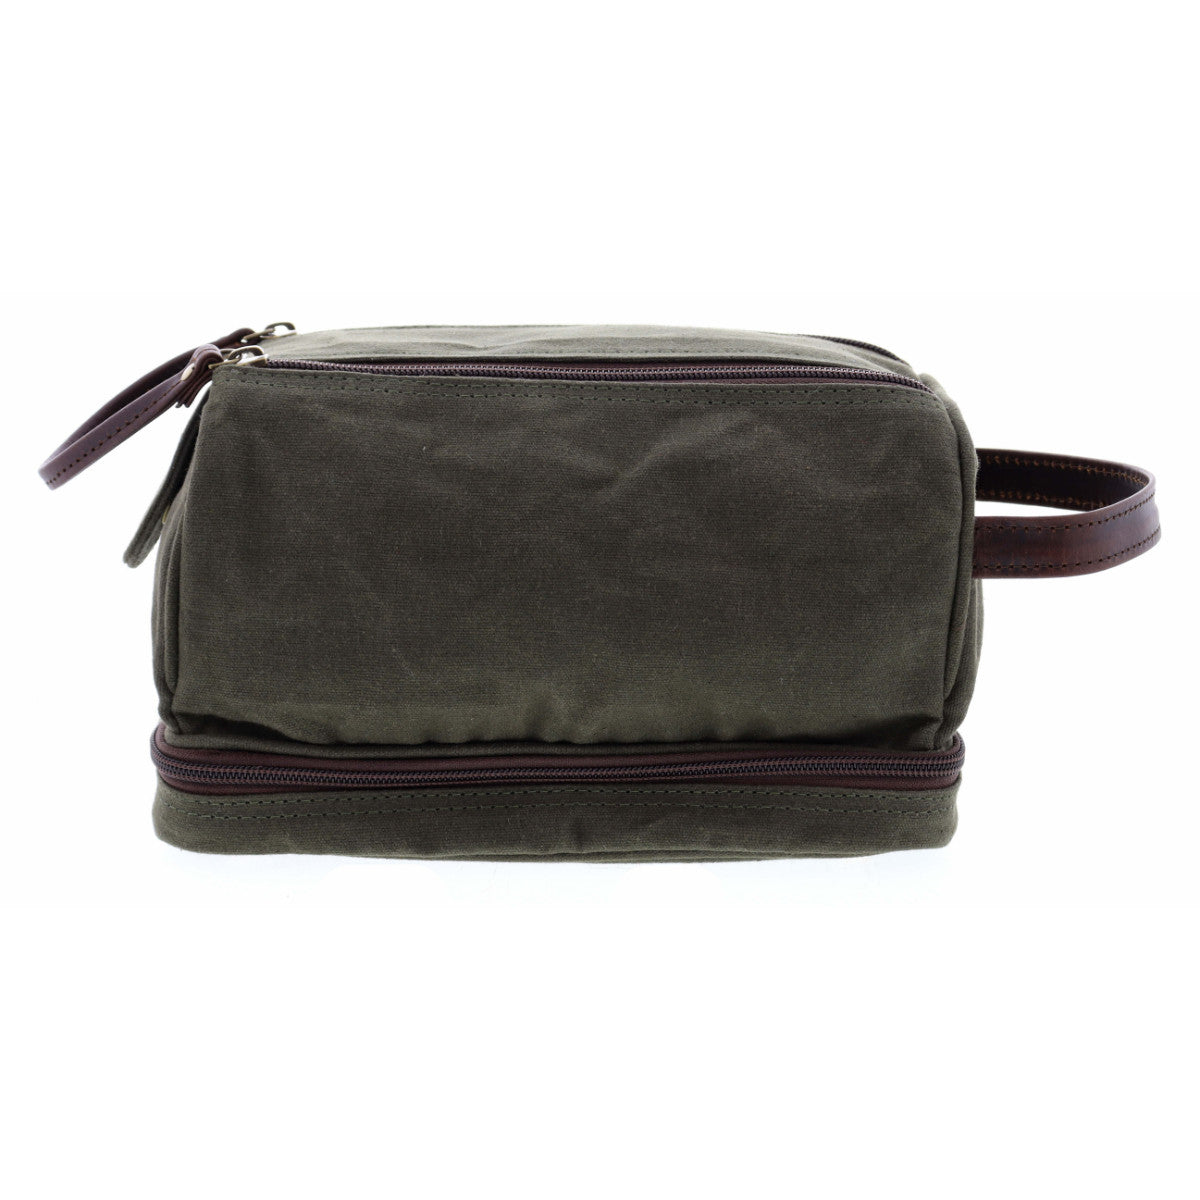 Jane Marie Canvas Toiletry Bag